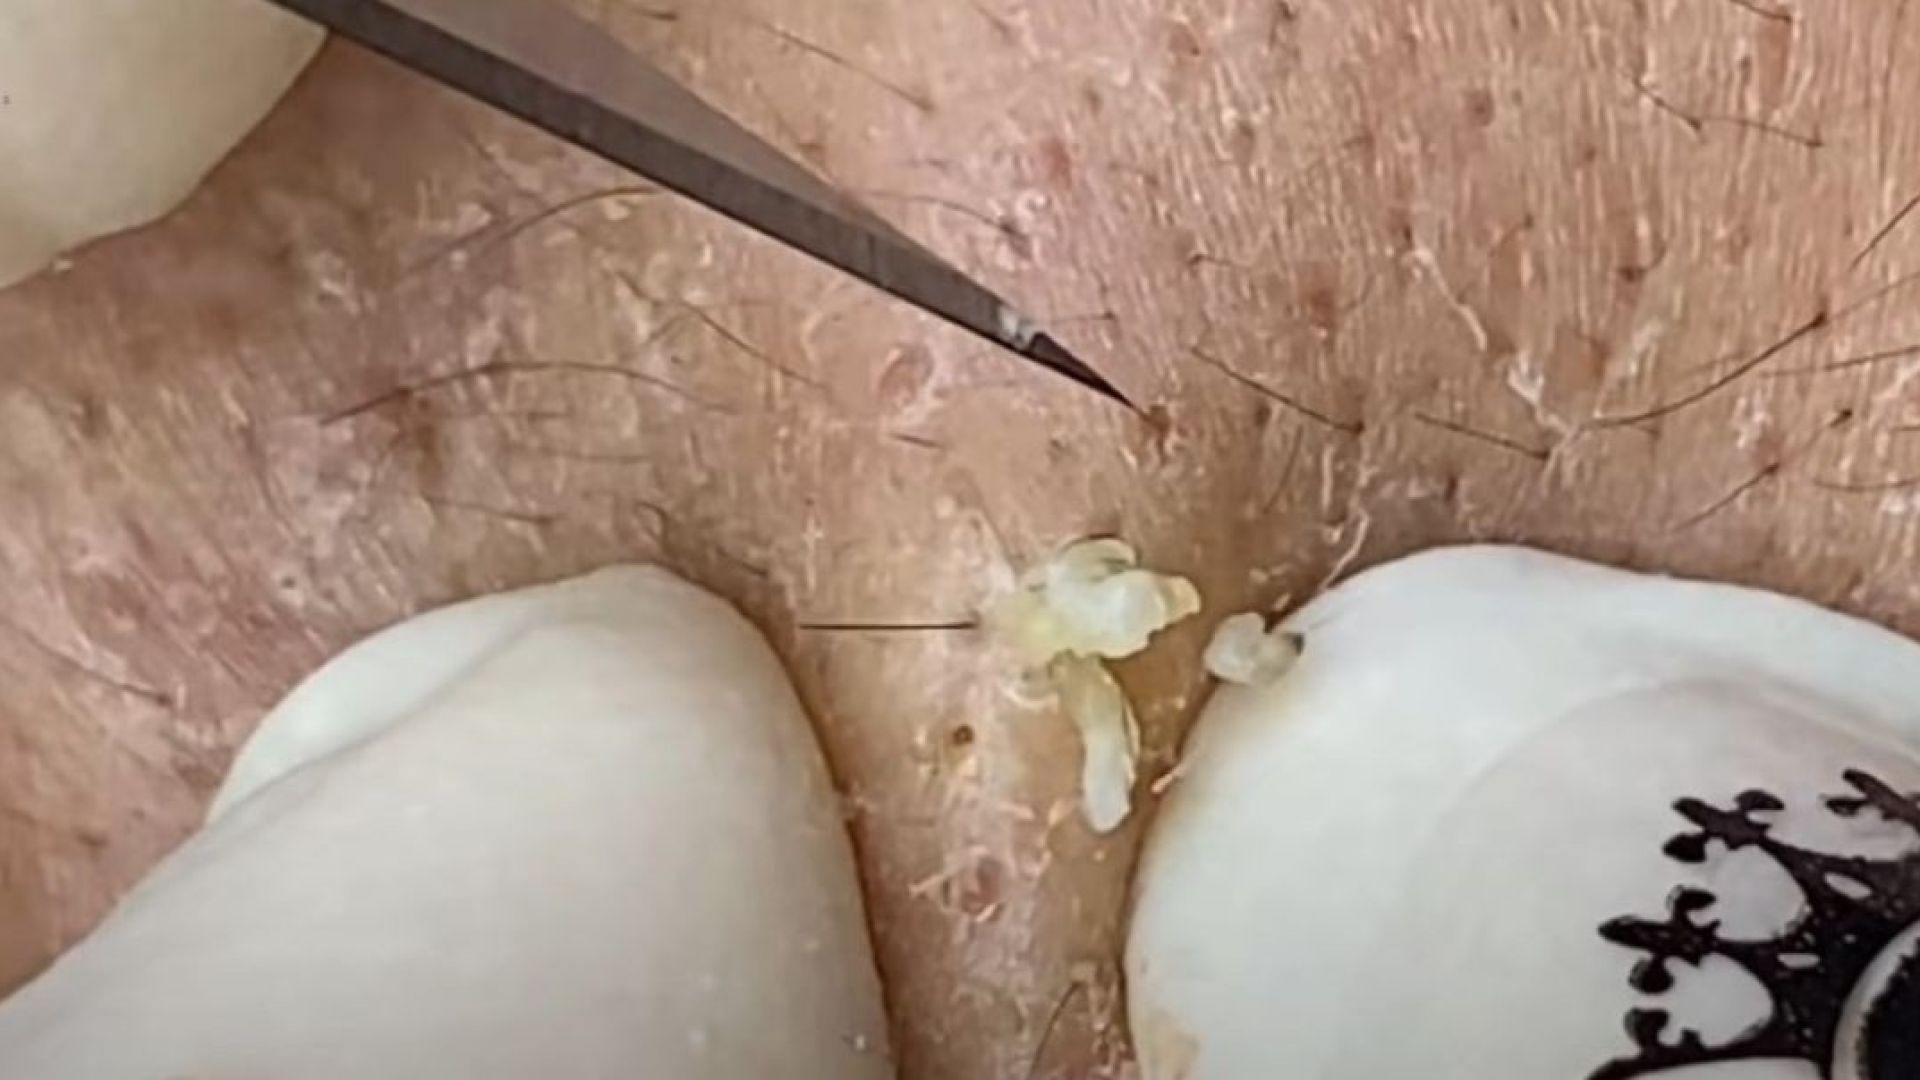 Get satisfied with the biggest pimple ever popped